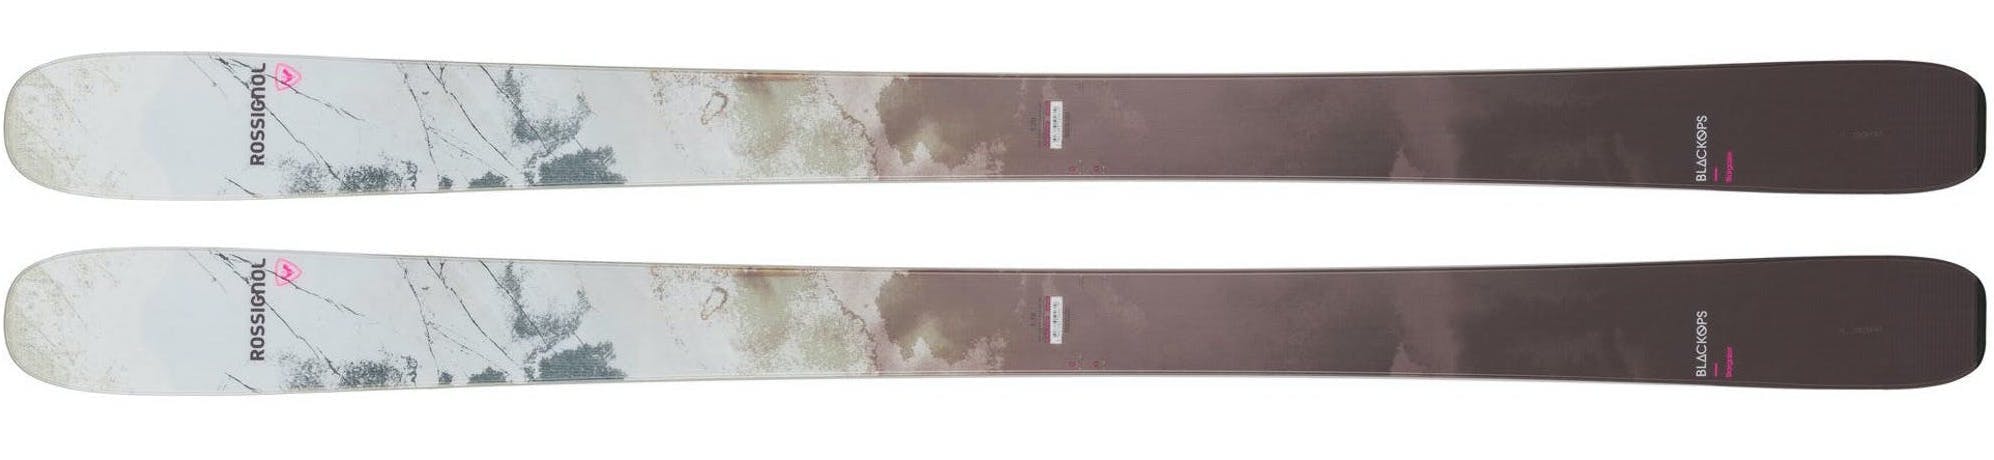 A pair of white and brown skis from Rossignol